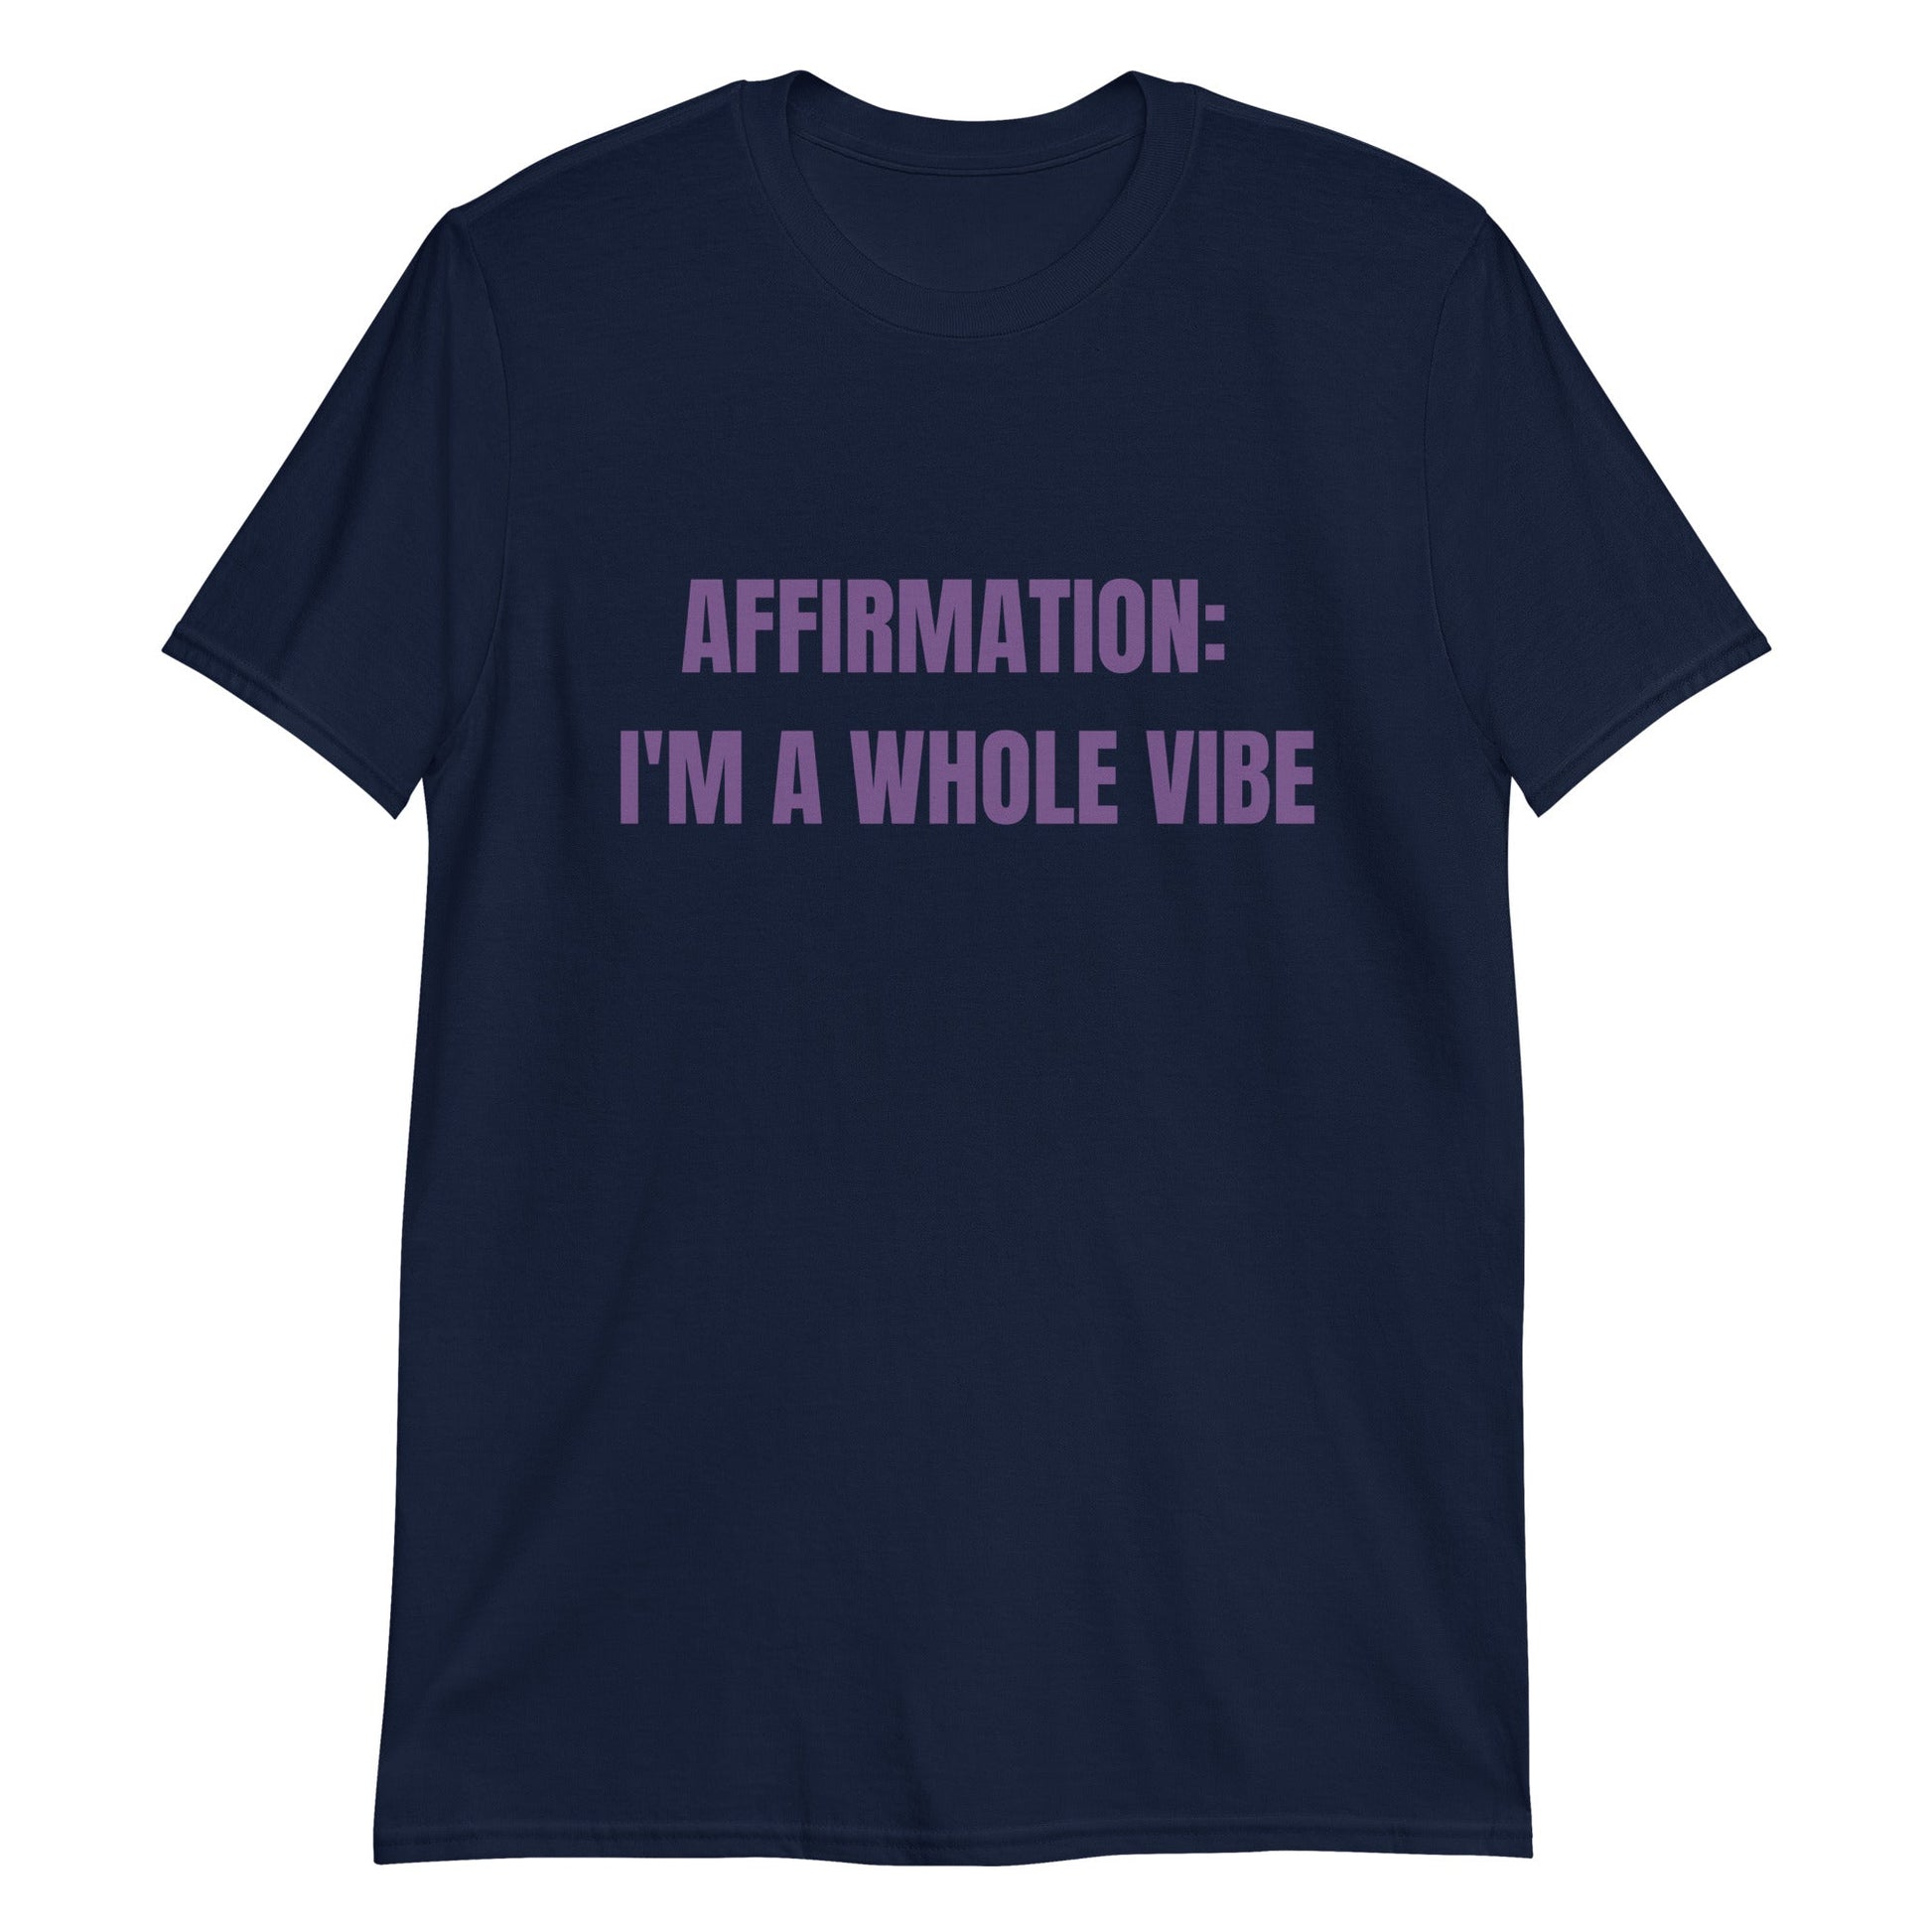 Affirmation: I'm a Whole Vibe Short-Sleeve Unisex T-Shirt (Refer to size chart - for a slim fir order a size down)Short-Sleeve Unisex T-Shirt - Catch This Tea Shirts